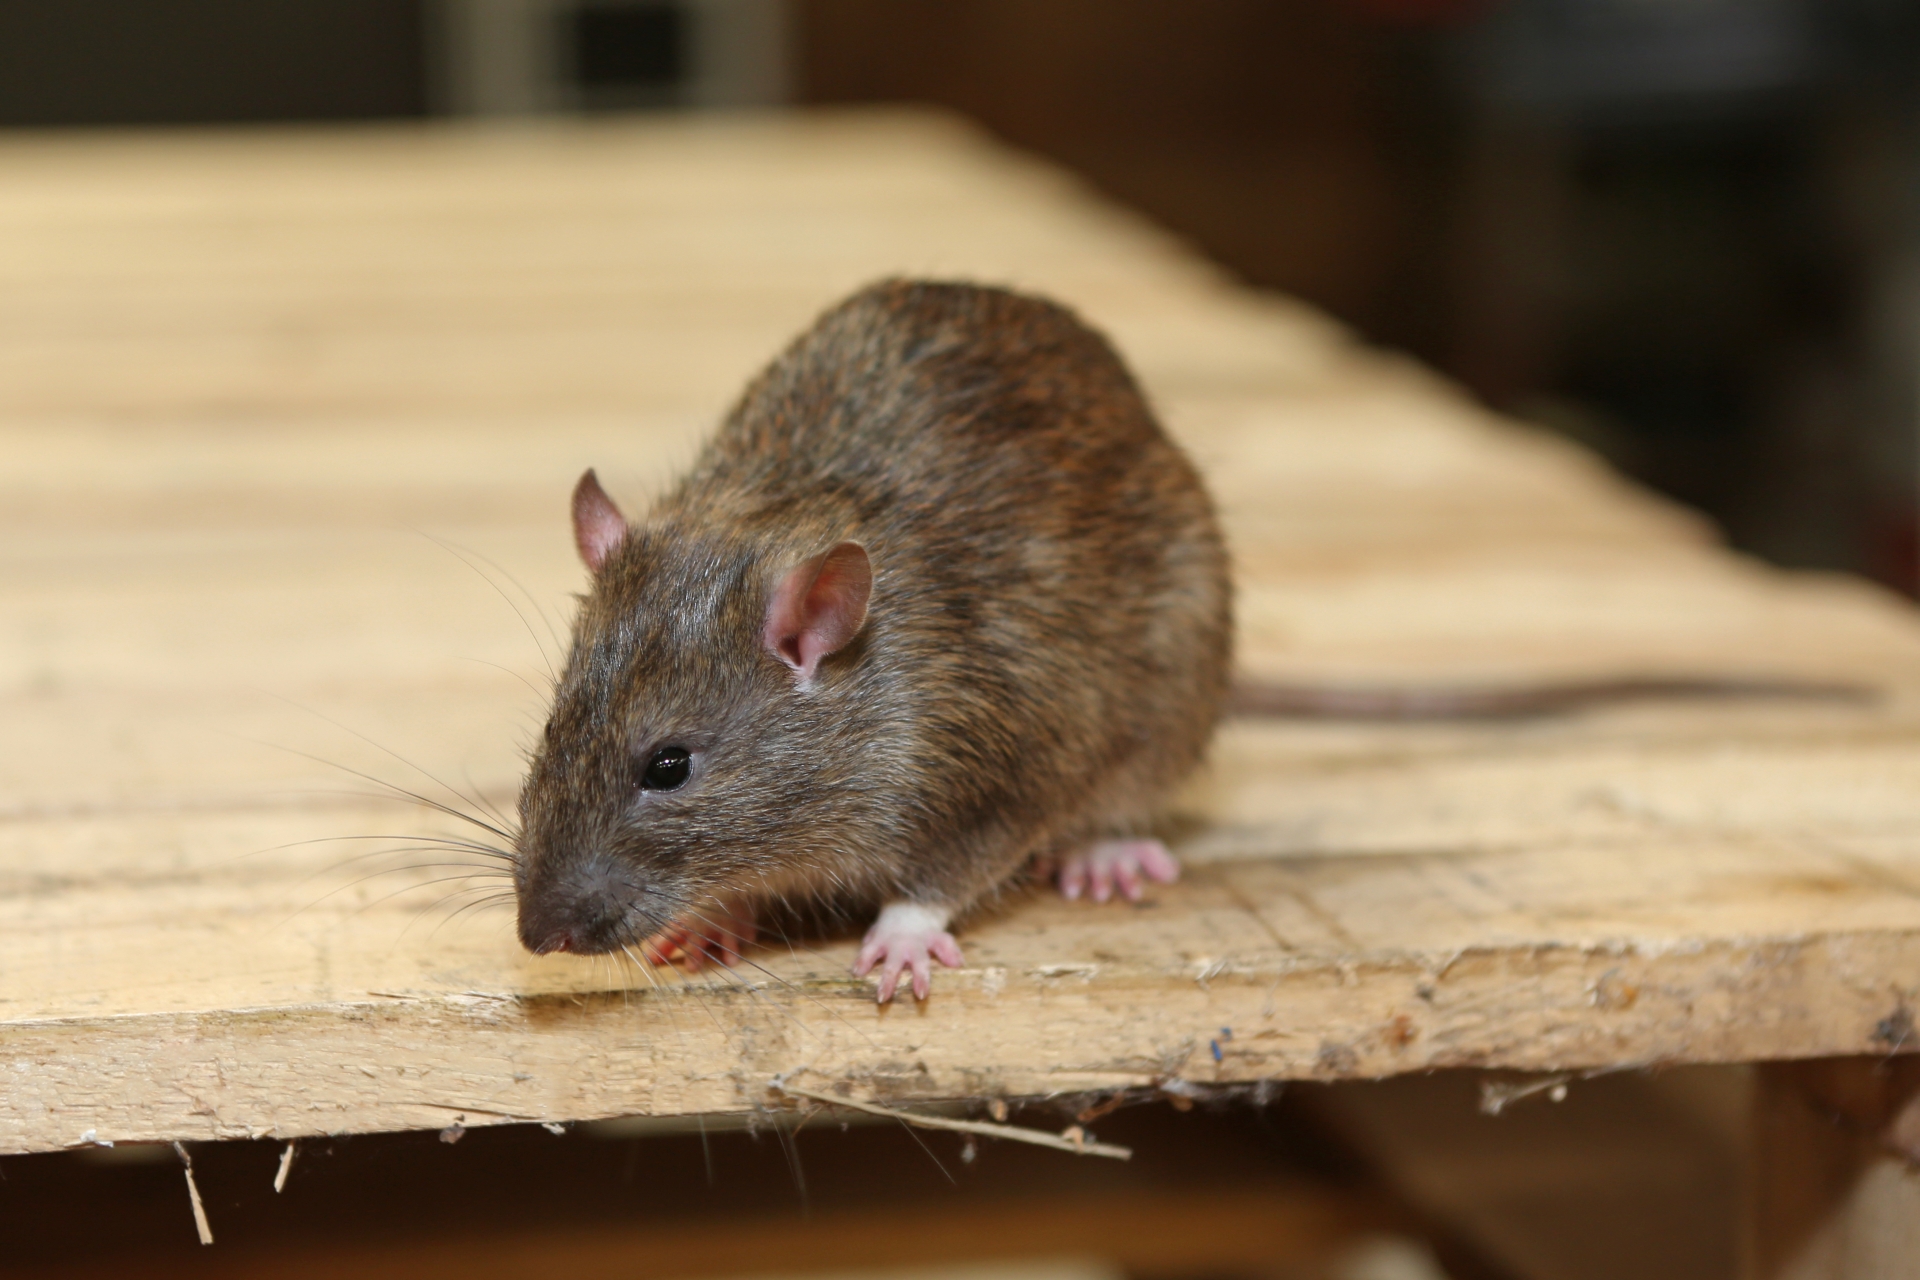 Rat extermination, Pest Control in Norbury, SW16. Call Now 020 8166 9746